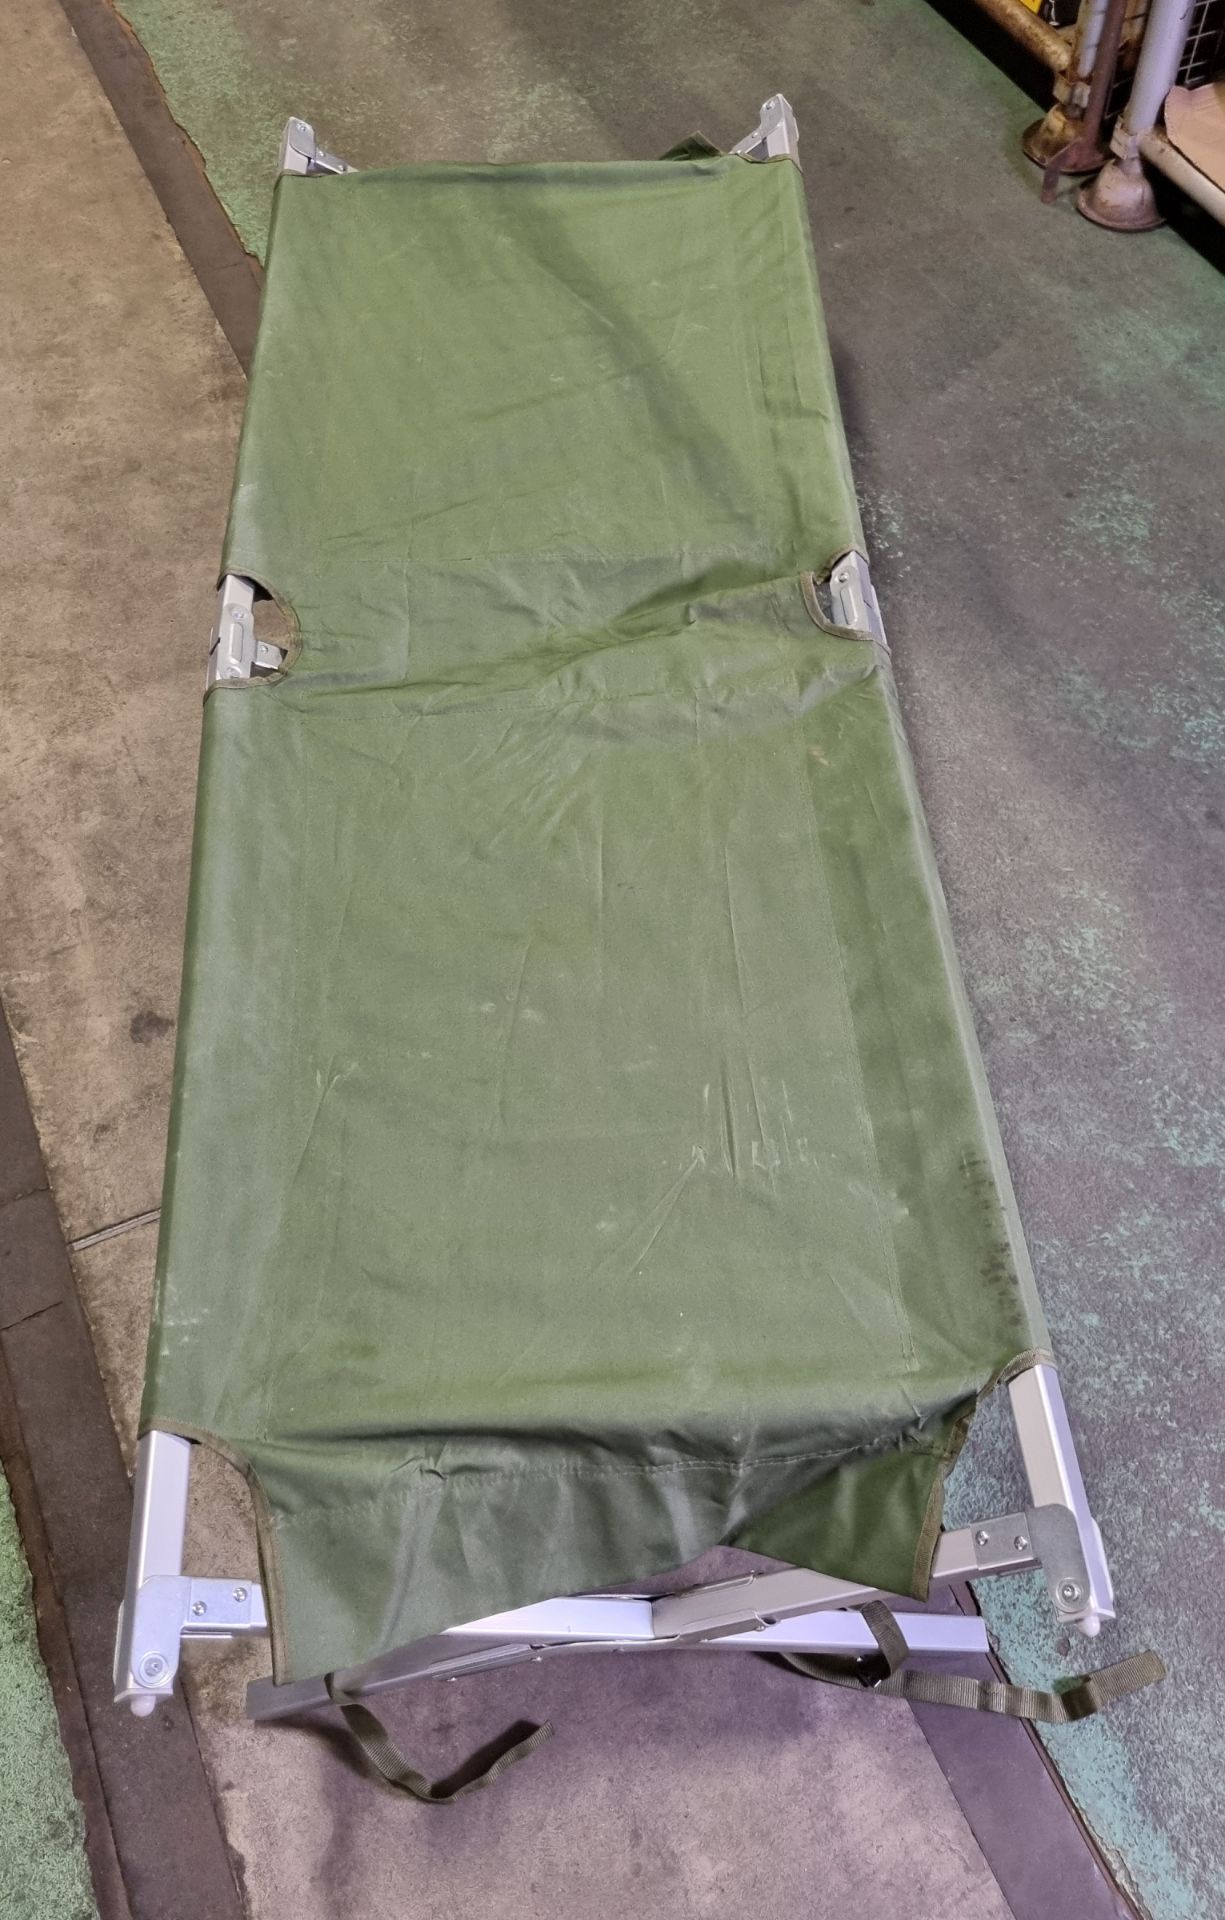 15x Folding field cots with carry bag - L 1900 x W 700 x H 450mm - Image 4 of 5